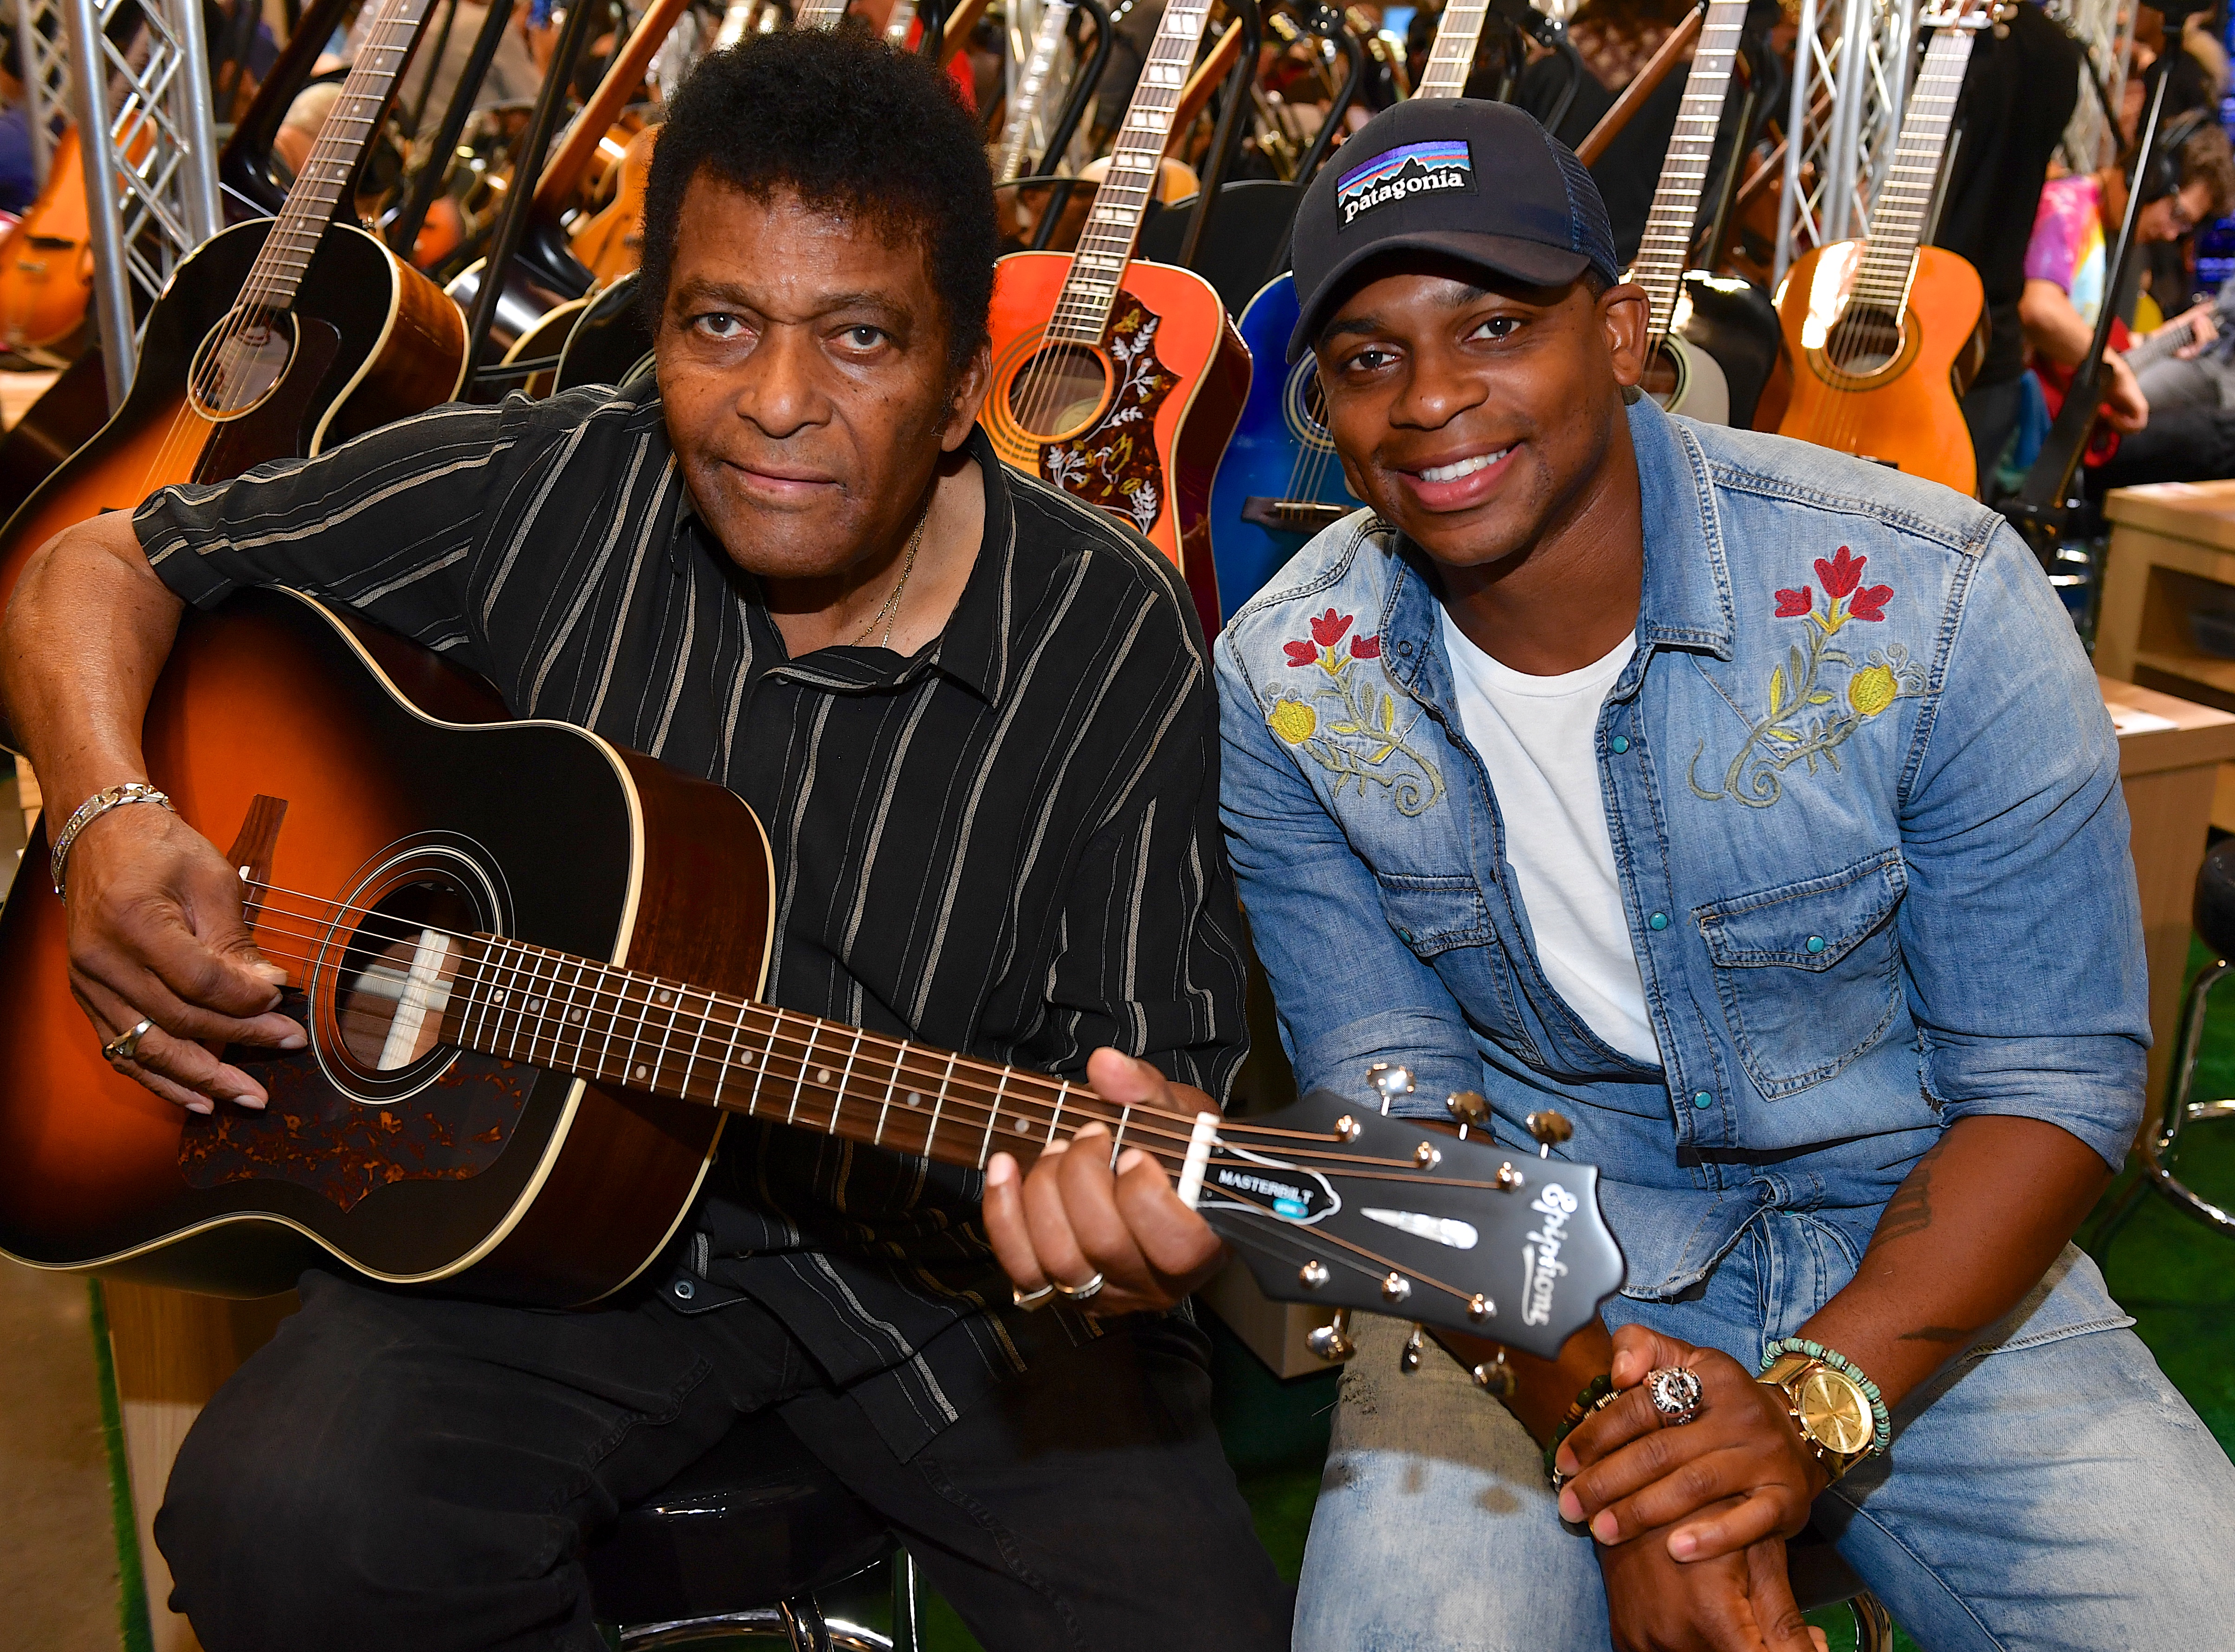 Charley Pride with Jimmy Allen during Summer NAMM Show Music Industry Day at Music City Center, on July 15, 2017 in Nashville, Tennessee. | Source: Getty Images